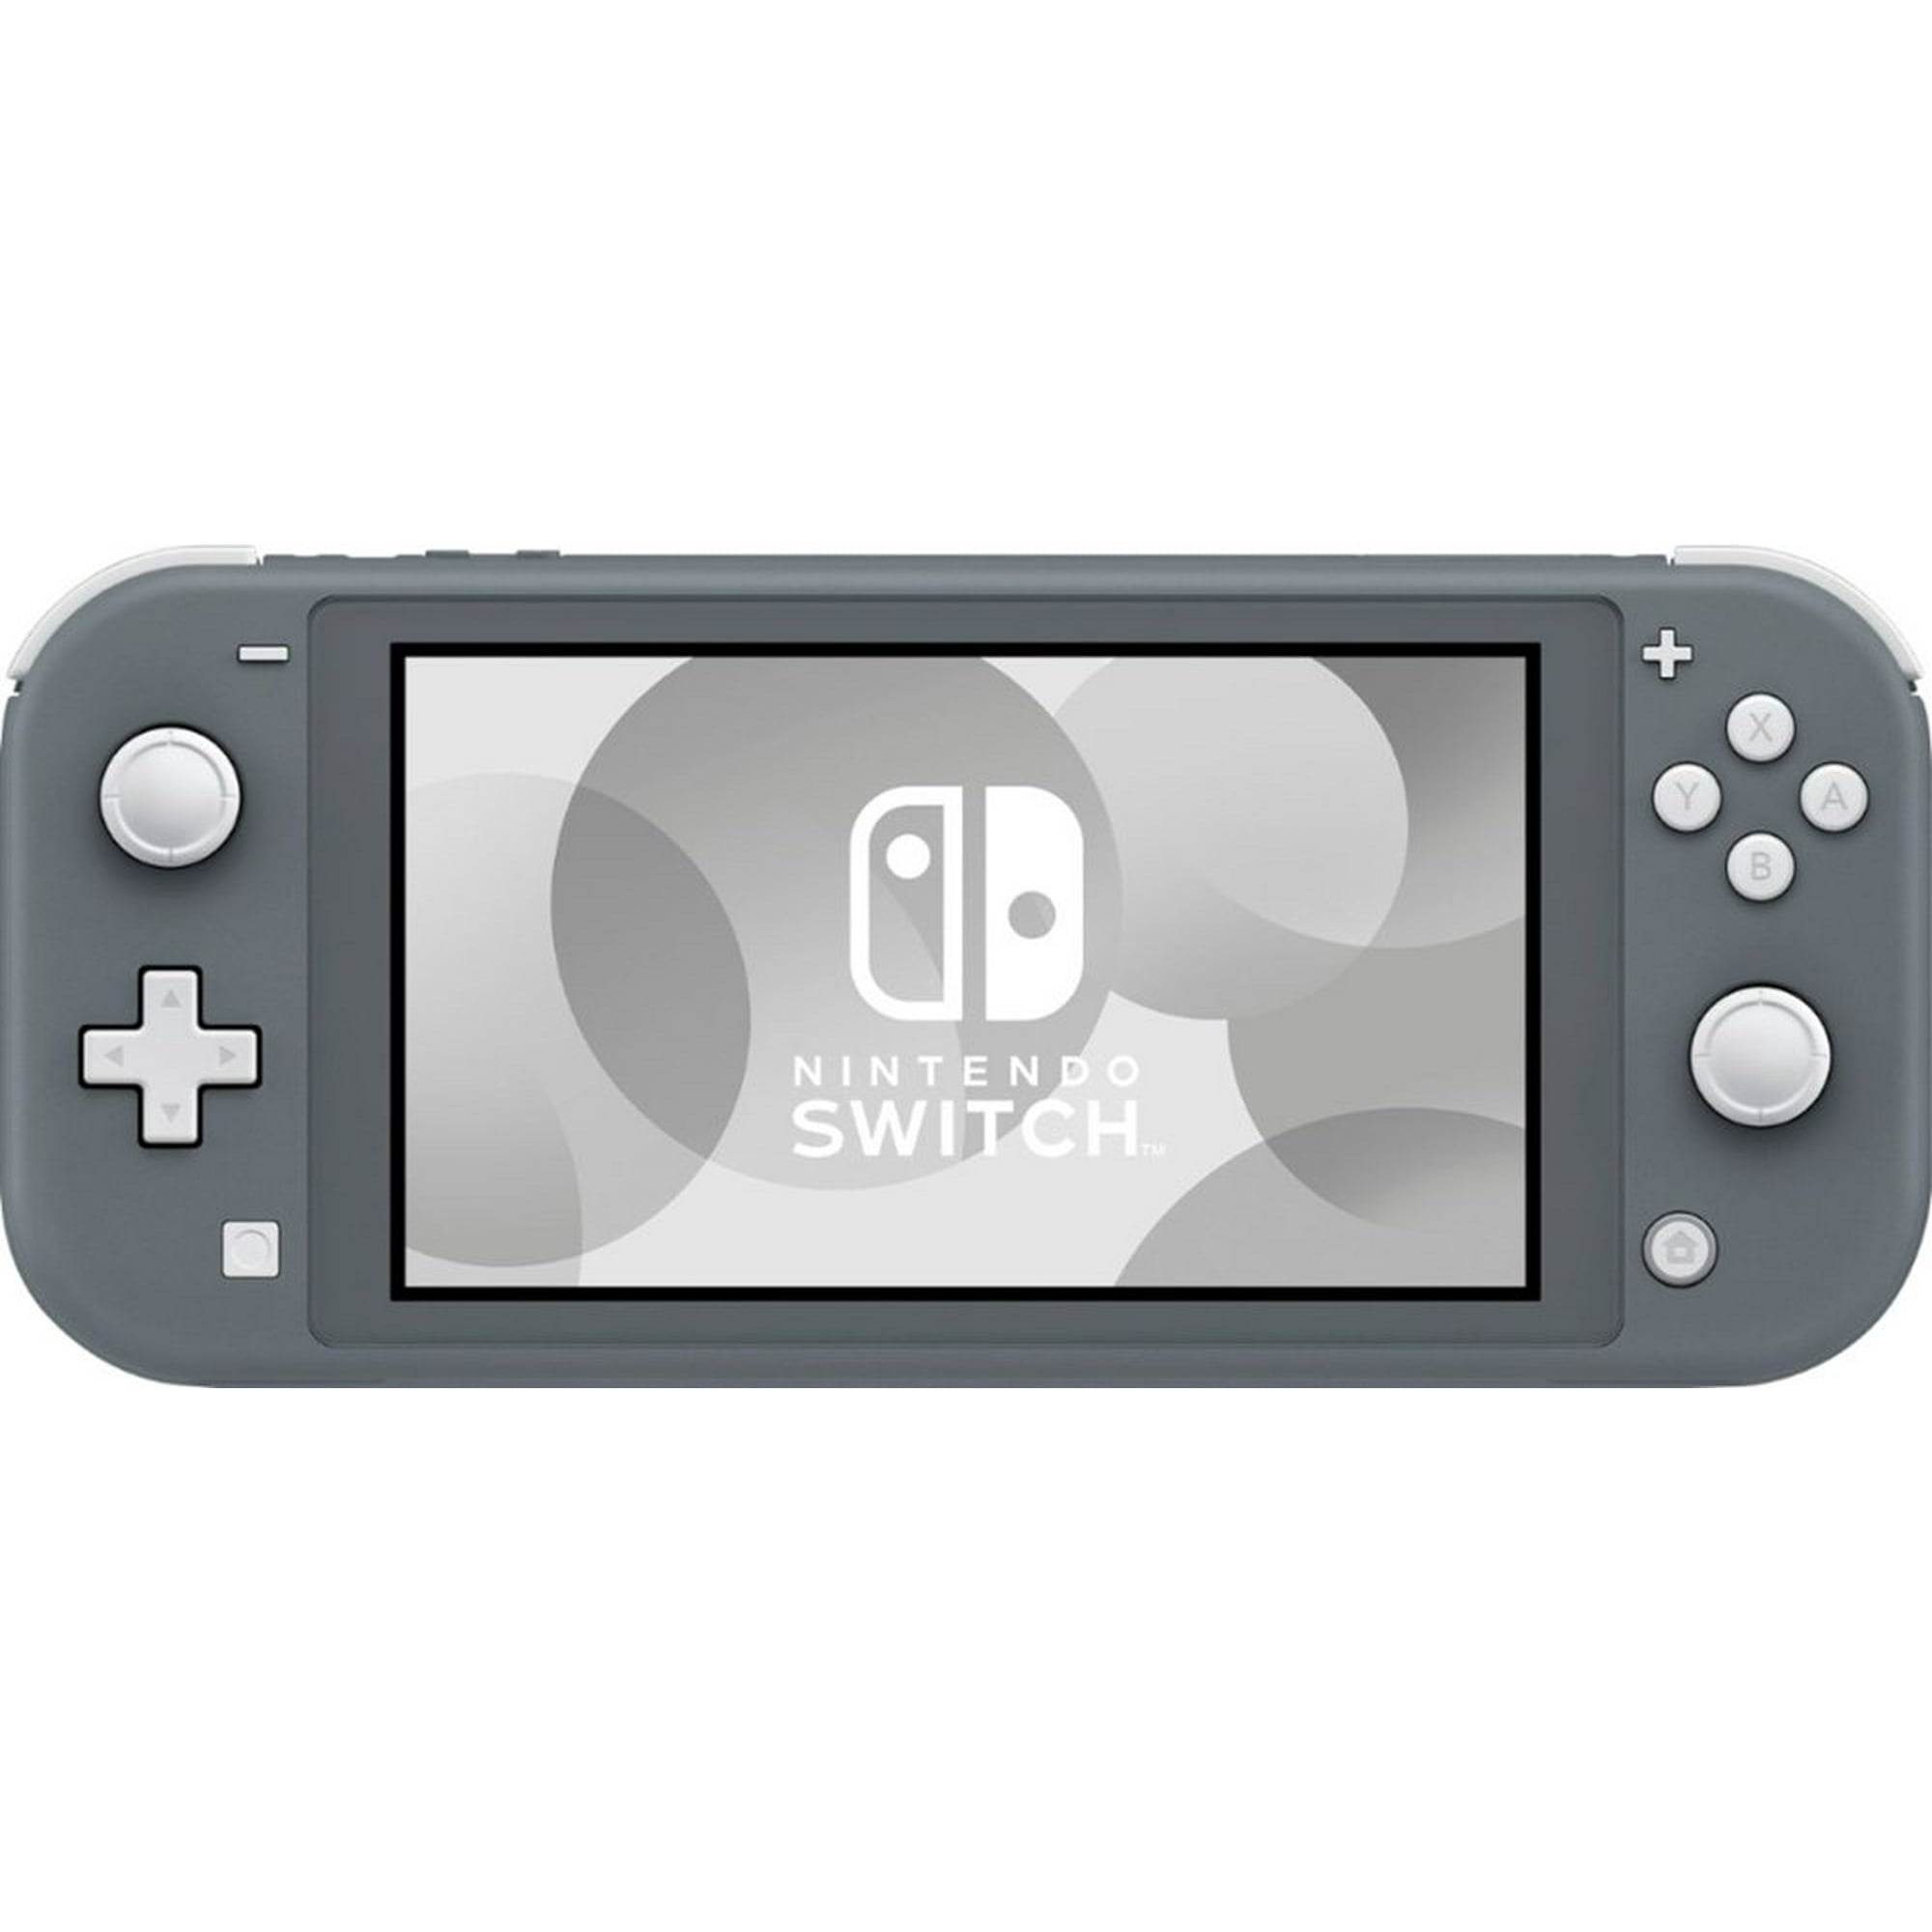 Nintendo Switch Lite Console, Blue - International Spec (Functional in US)  NEW 